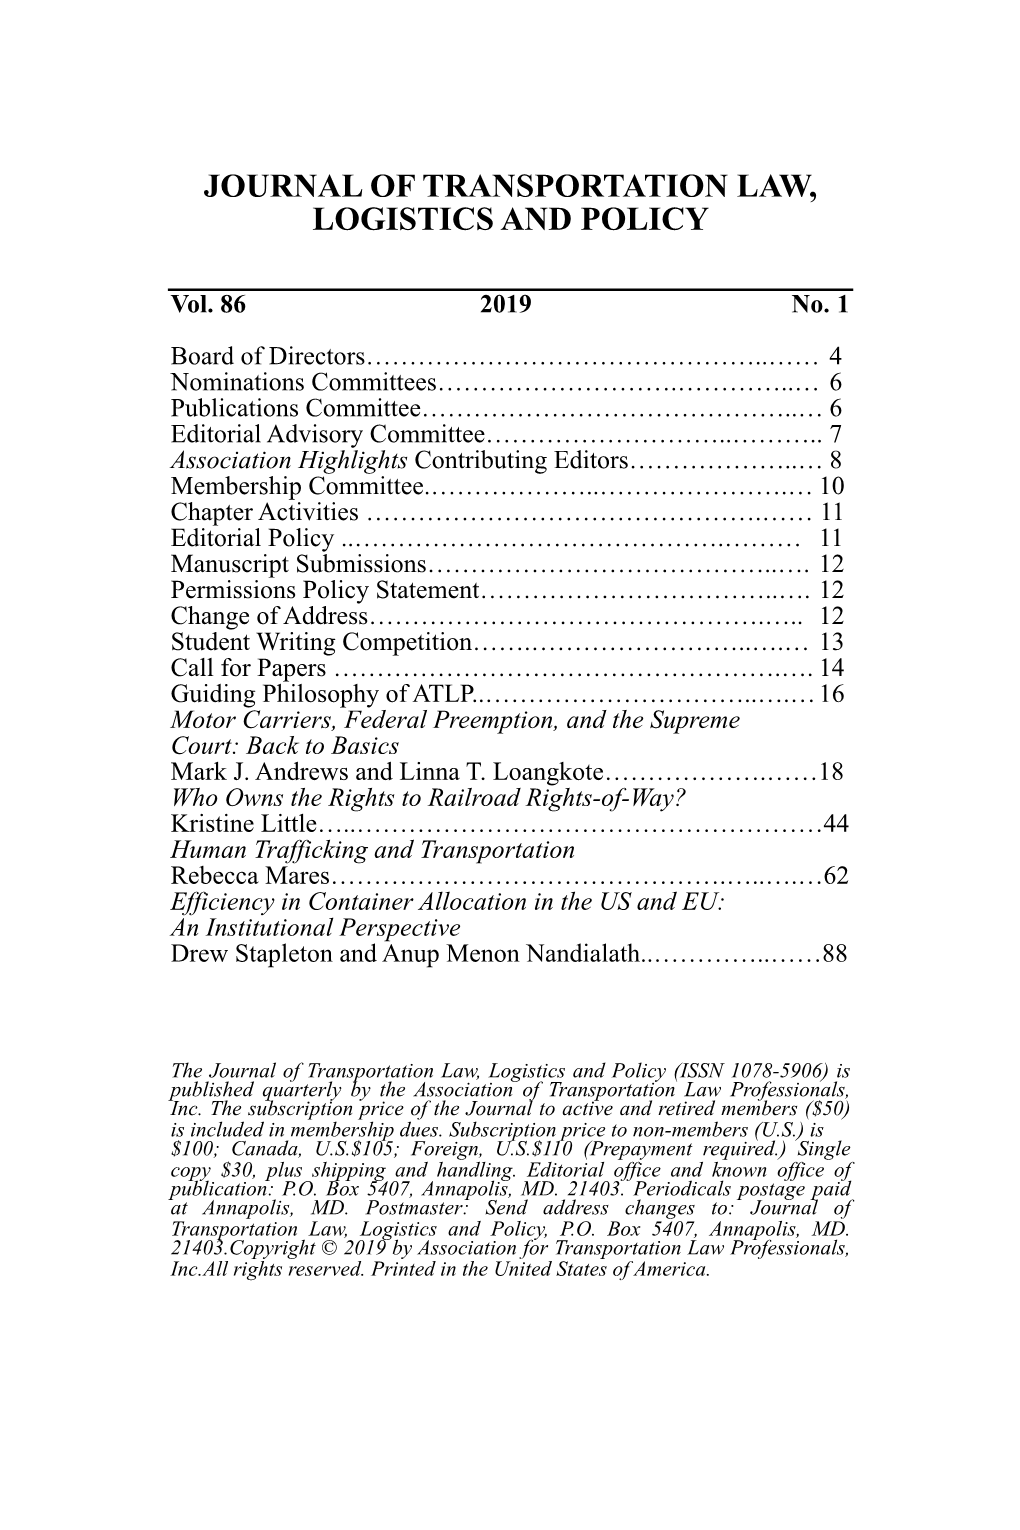 Journal of Transportation Law, Logistics and Policy